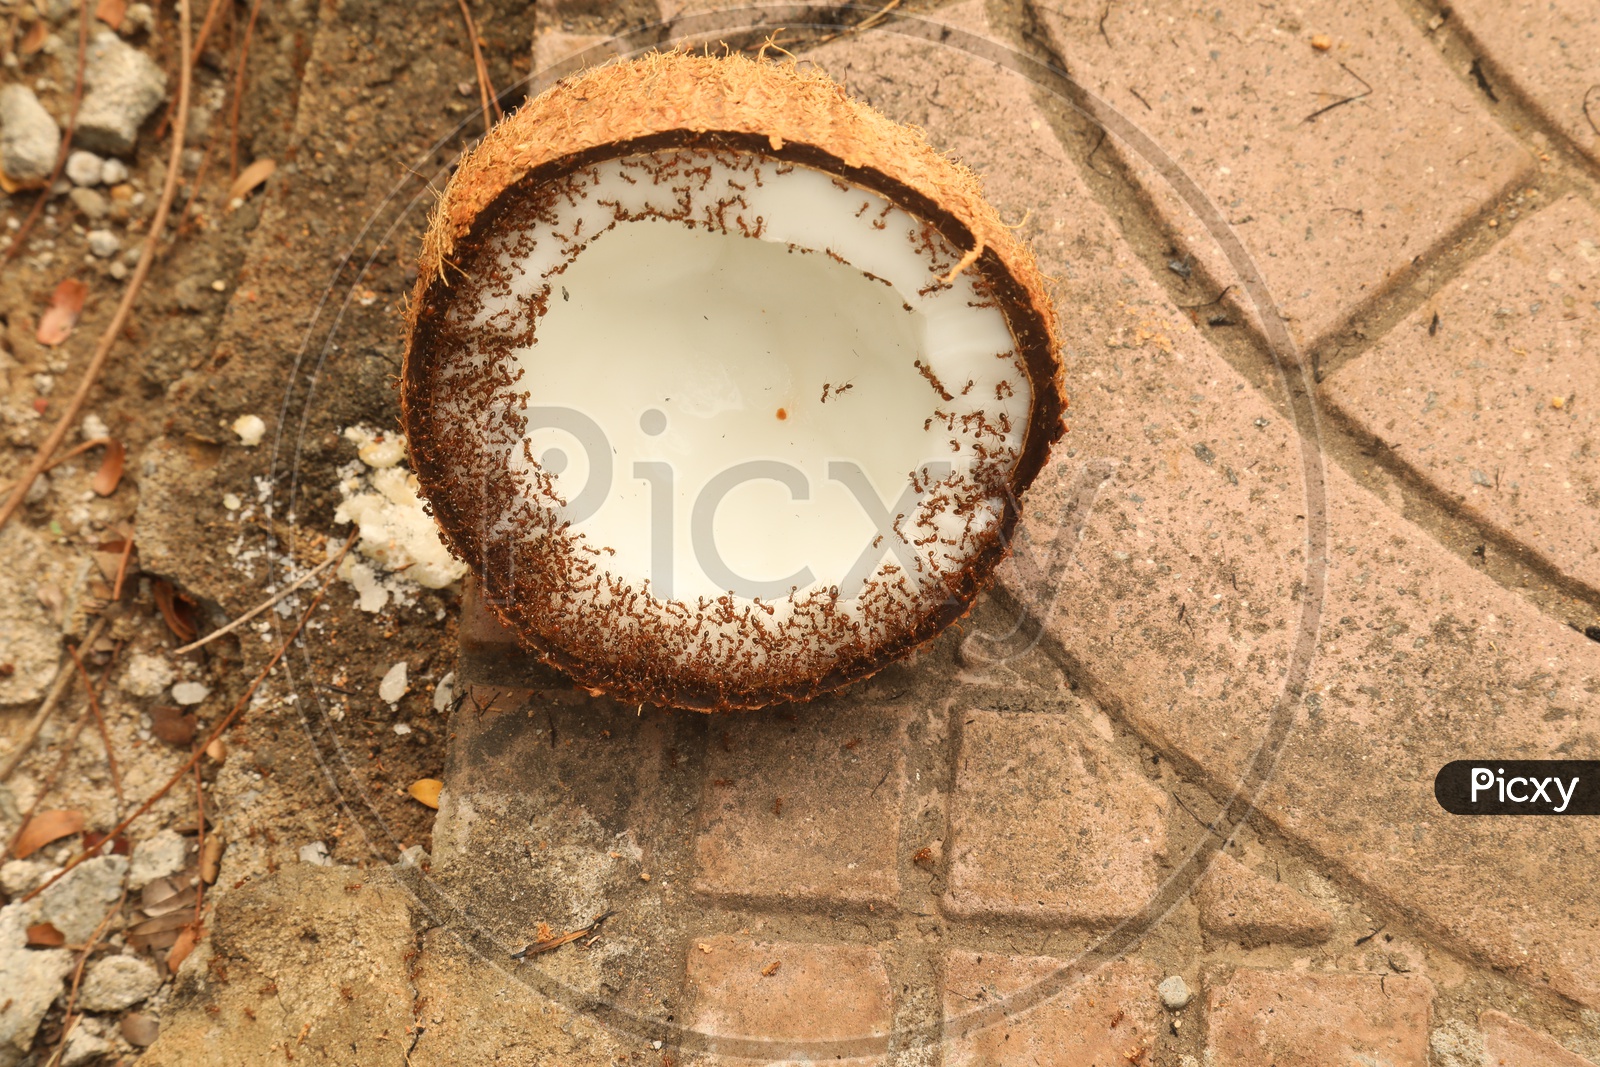 Red Ants To a Coconut Shell